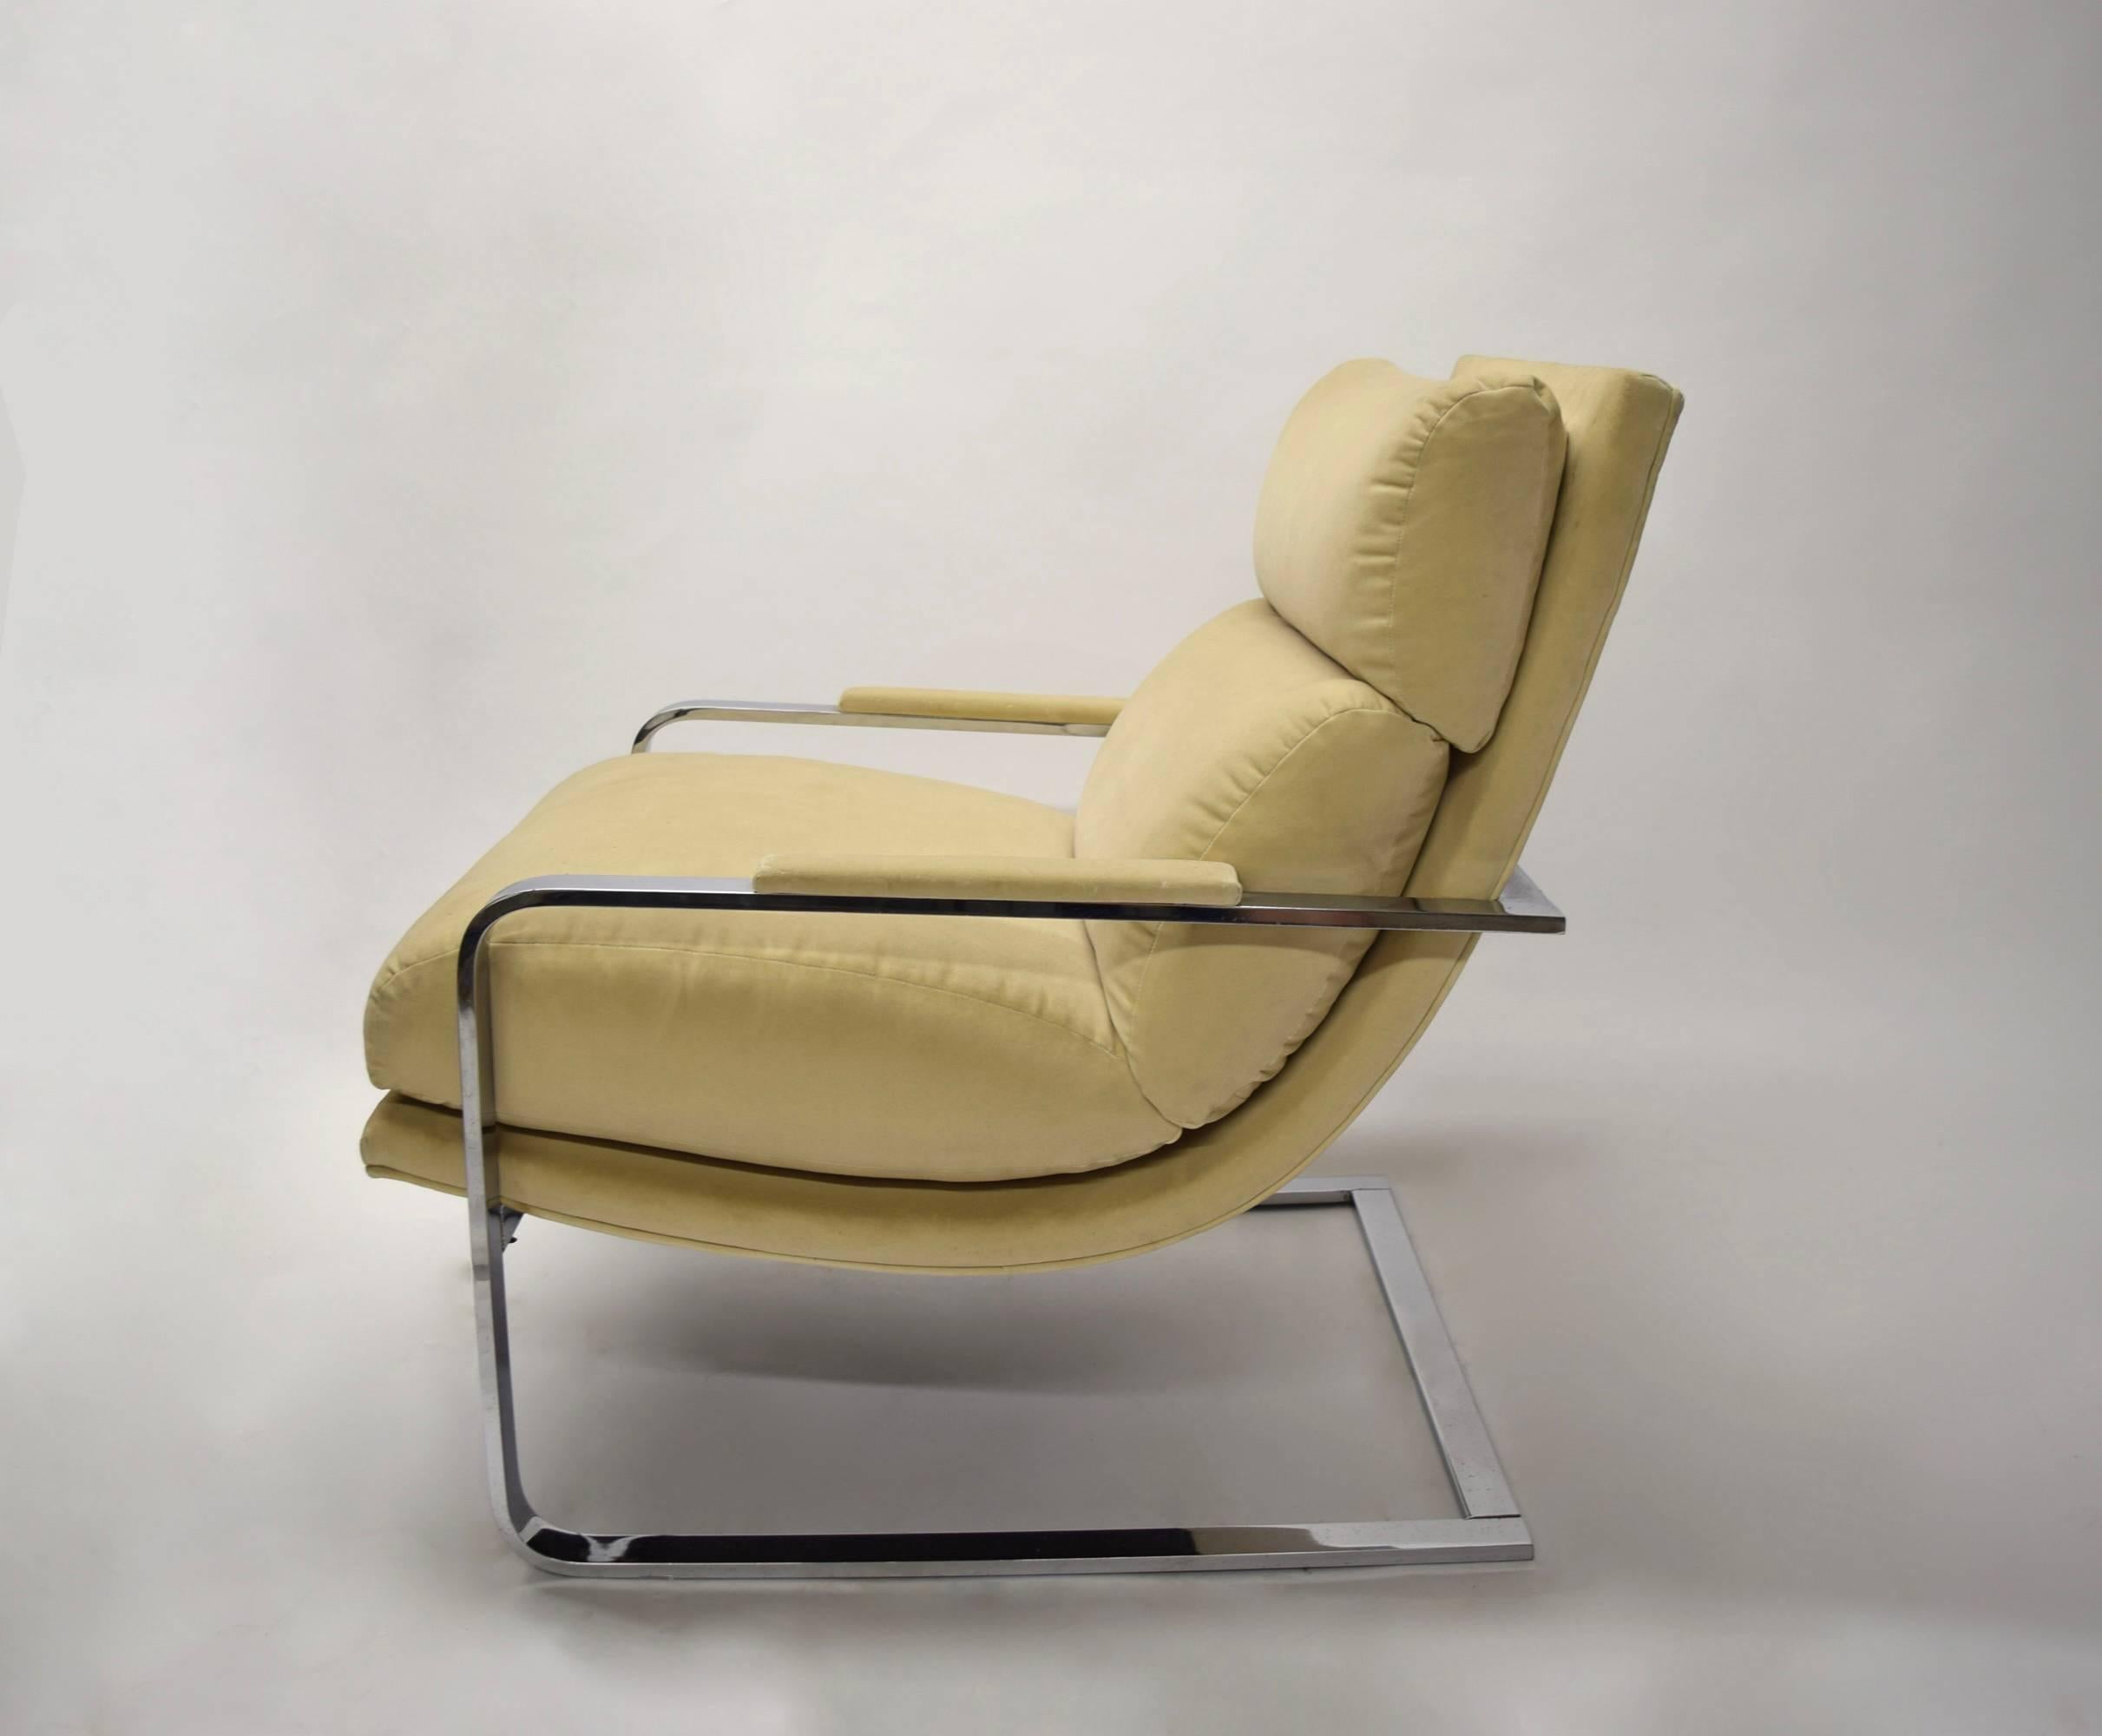 American Lounge Chair by Milo Baughman for Thayer Coggin, circa 1975 Made in USA